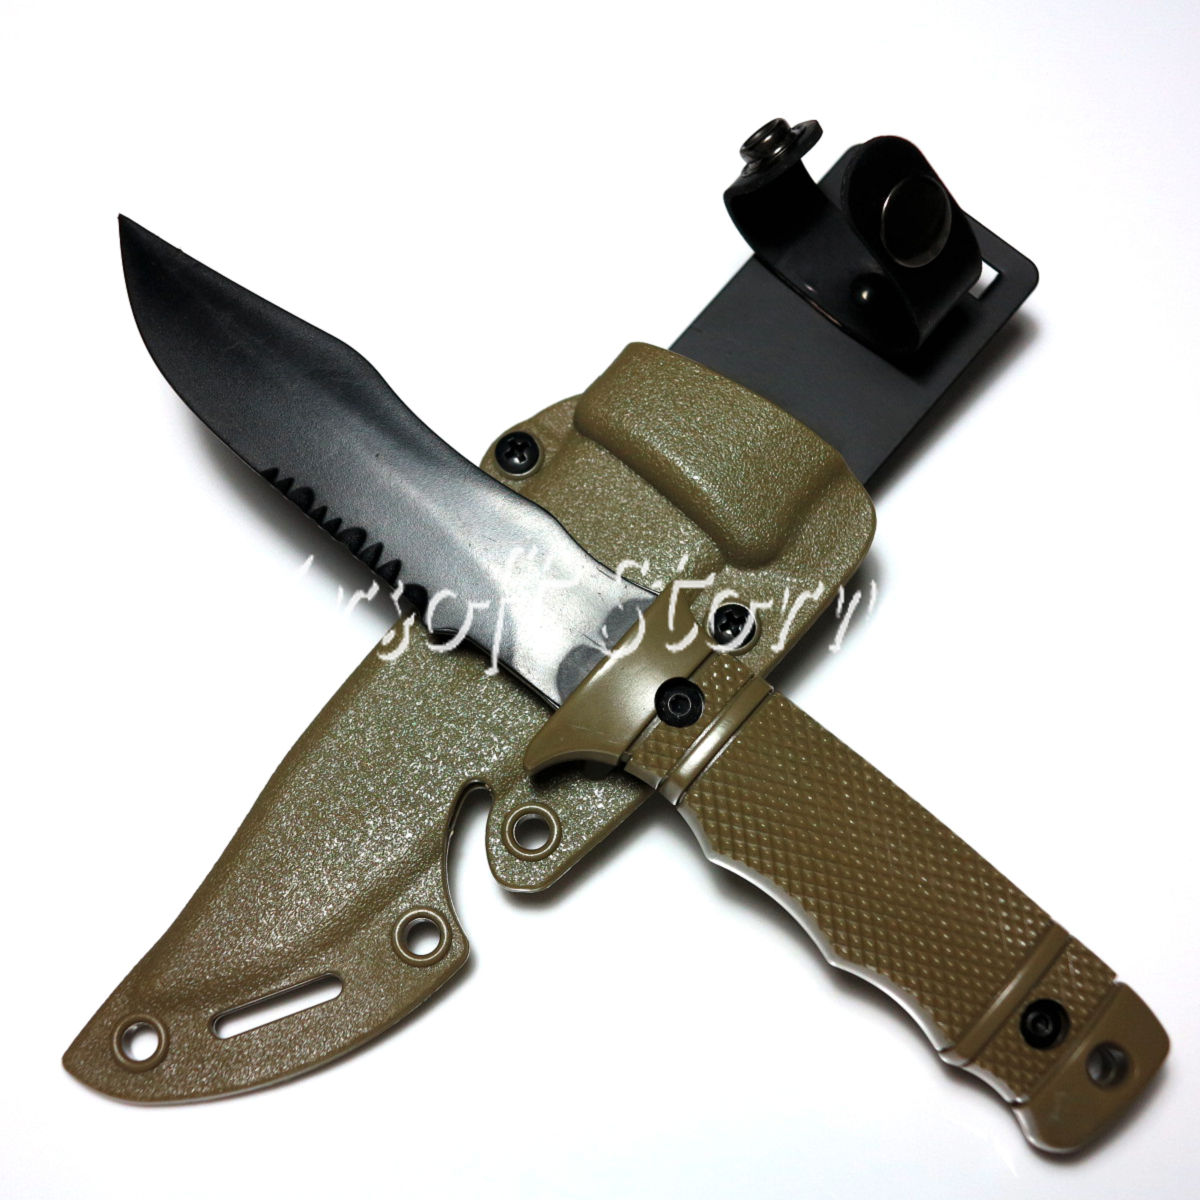 Airsoft Wargame Combat Gear CYMA Dummy Plastic M37 Seal Pup Knife with Sheath Tan (HY-016)